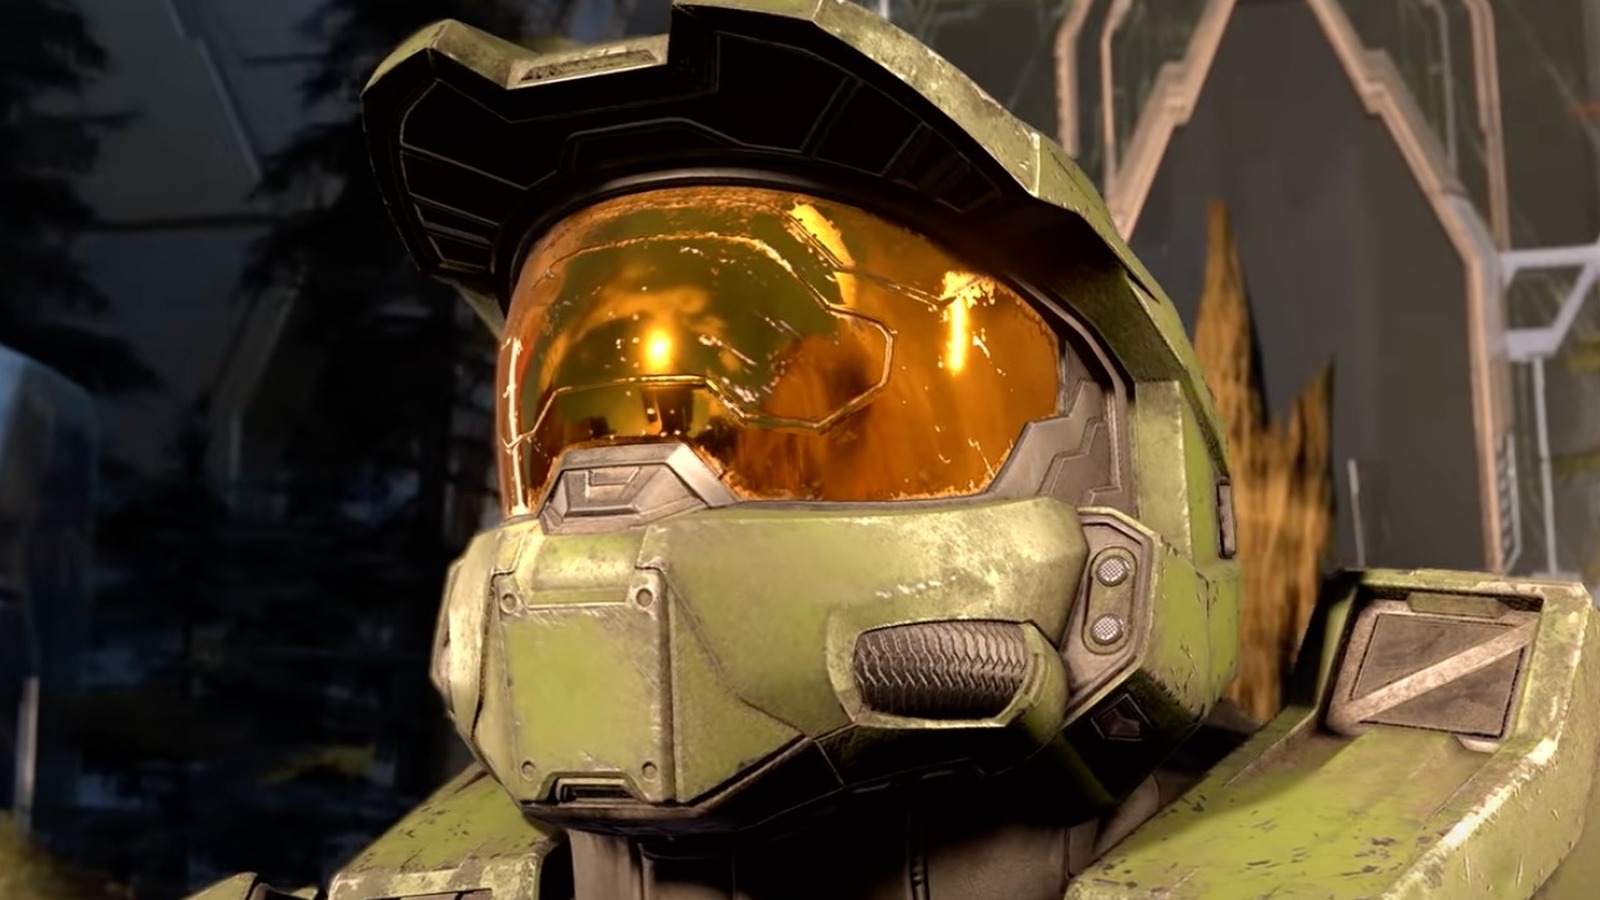 Review: Halo Infinite's campaign finishes the fight—but arrives in